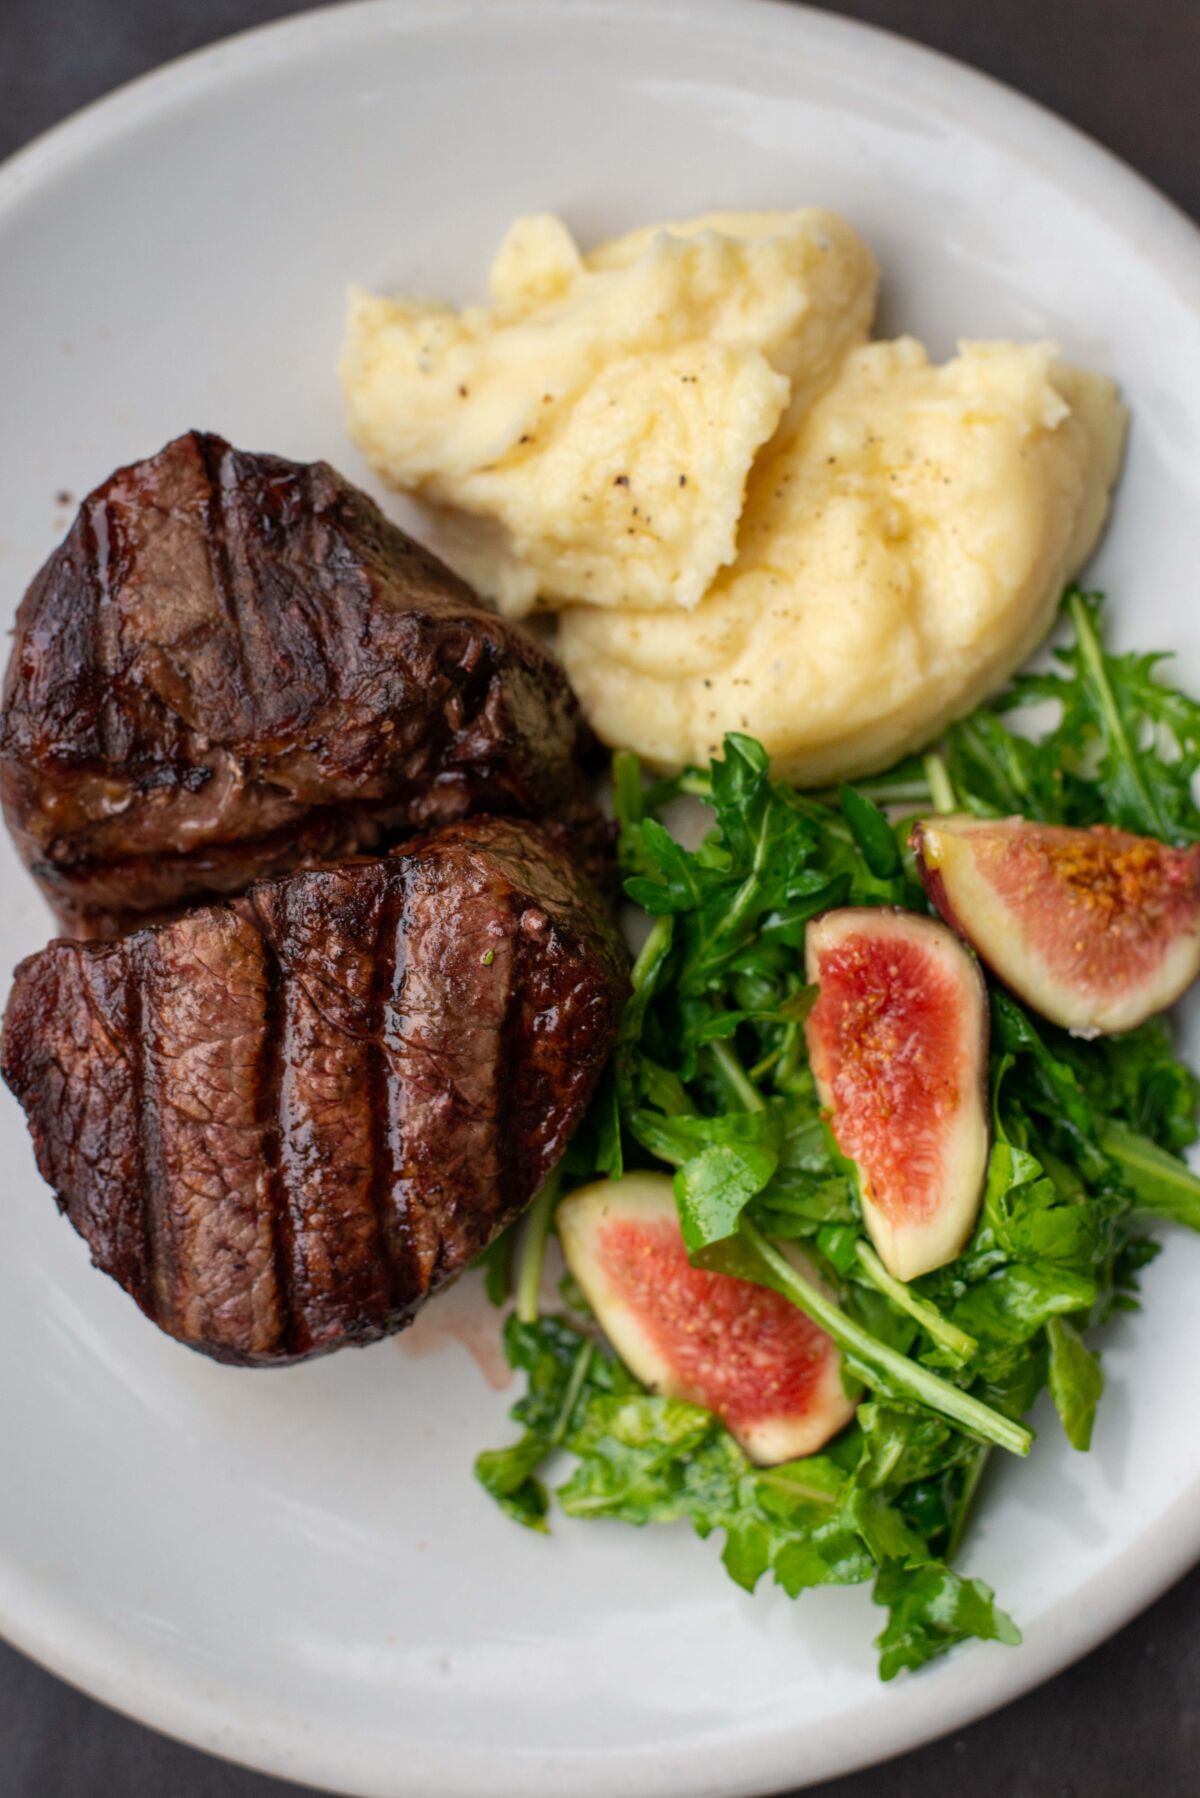 A steak filet, salad and potatoes are seen at a plat from the Don Julio steakhouse in Palermo.